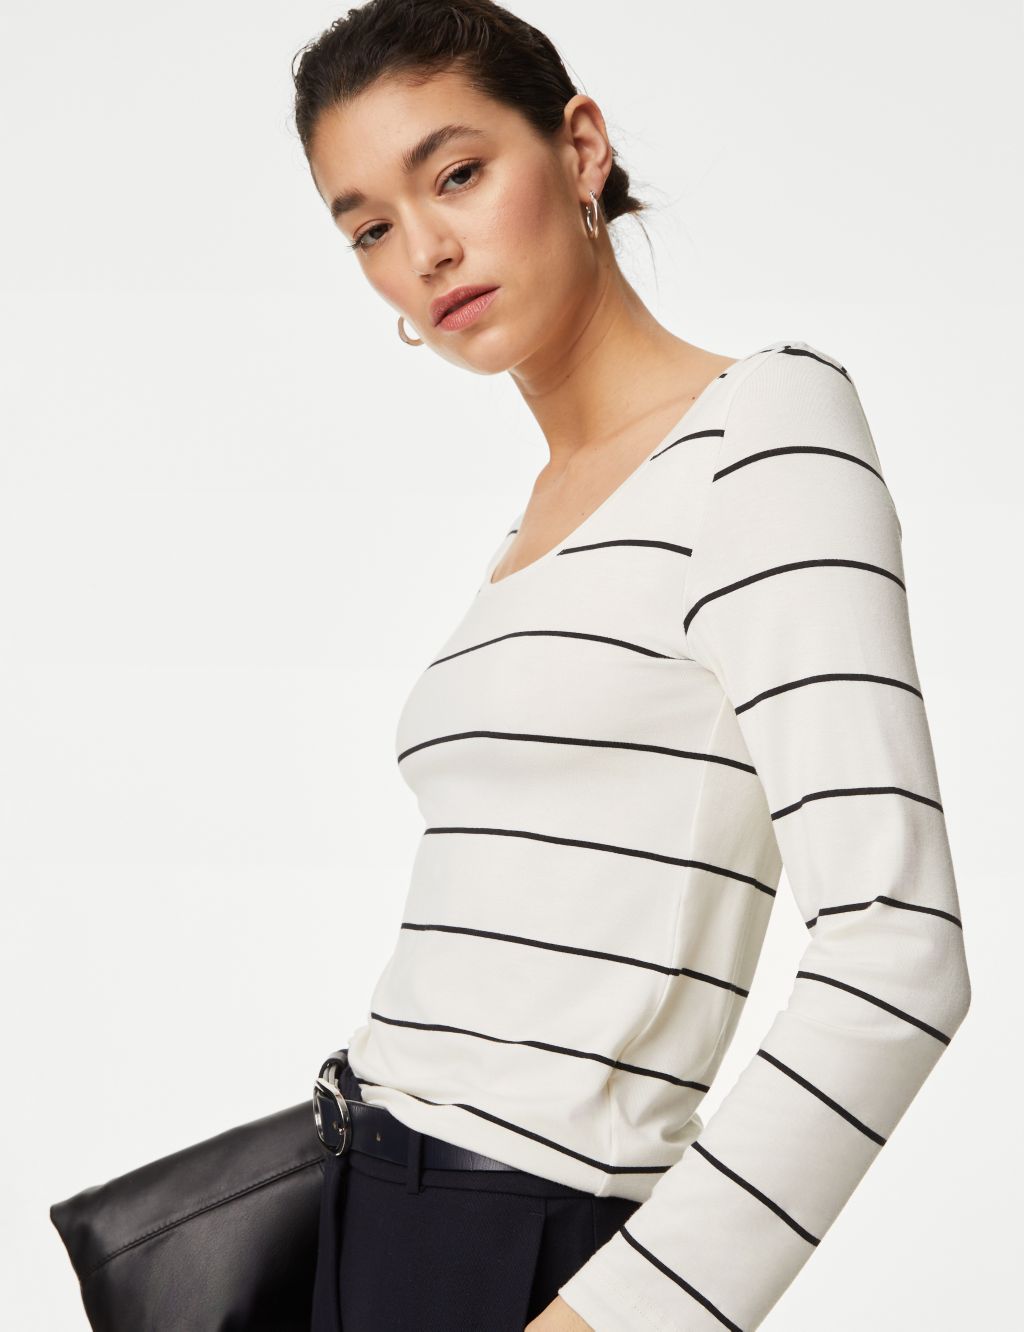 Jersey Striped Scoop Neck Top image 1